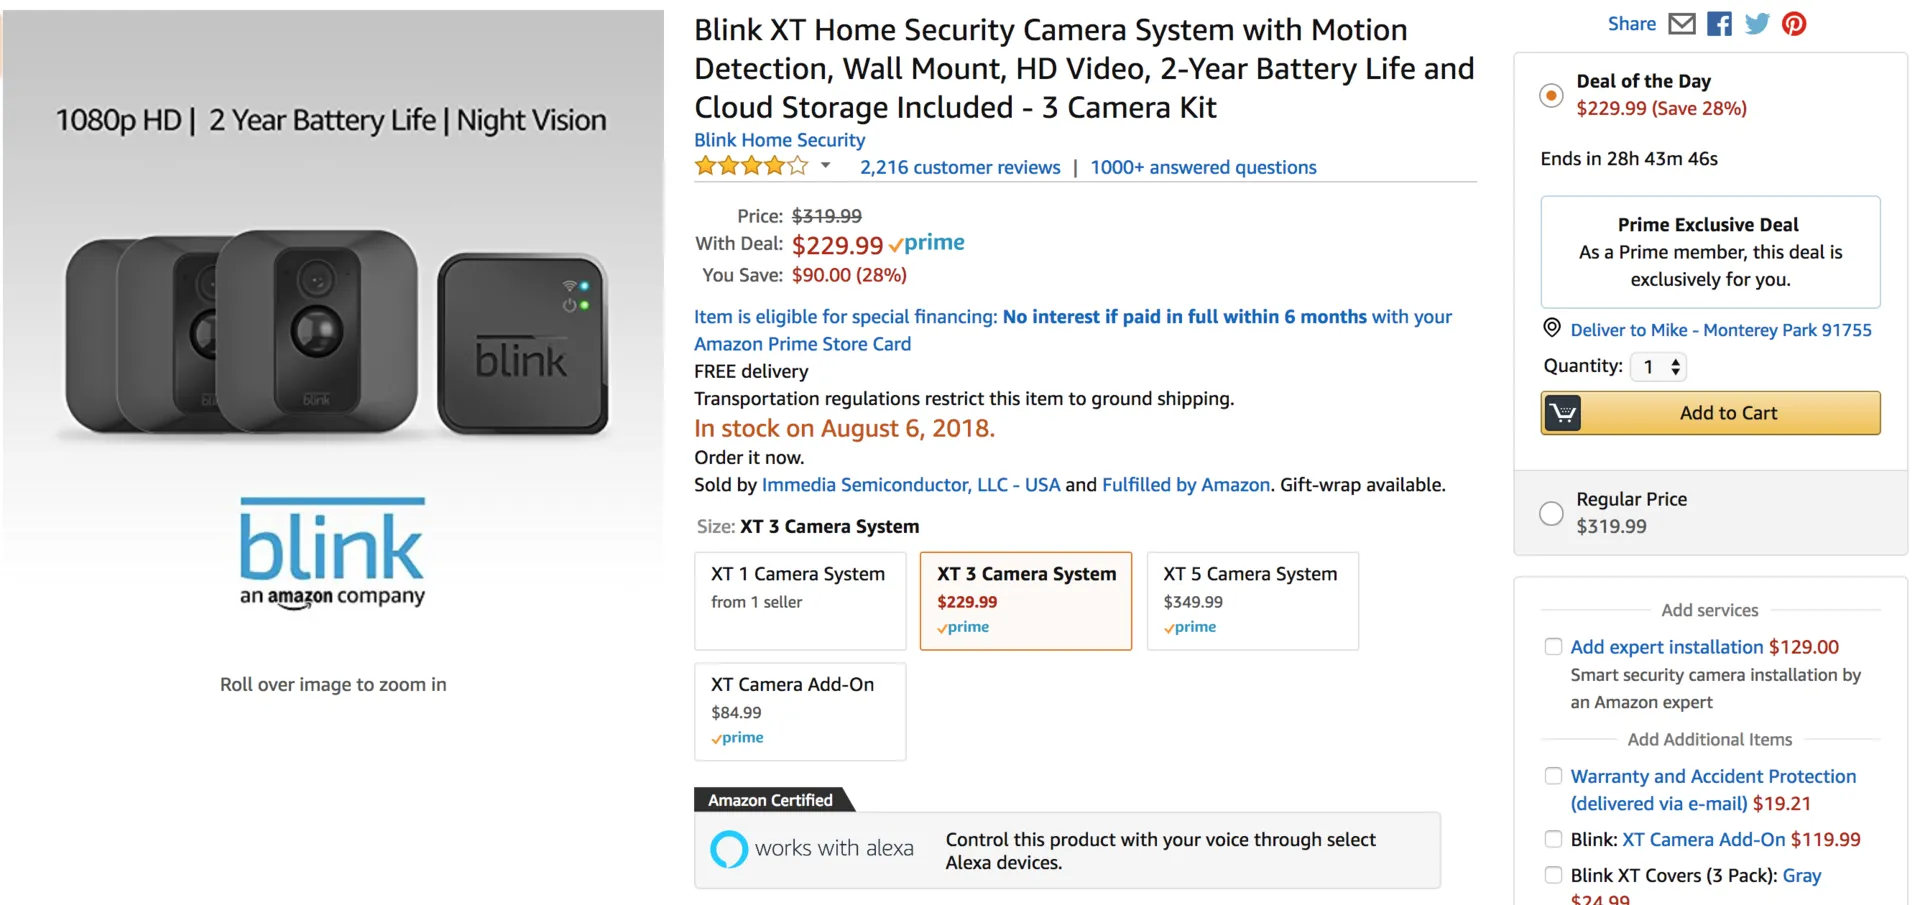 Blink Battery Powered Security Camera System Prime Deal(s)